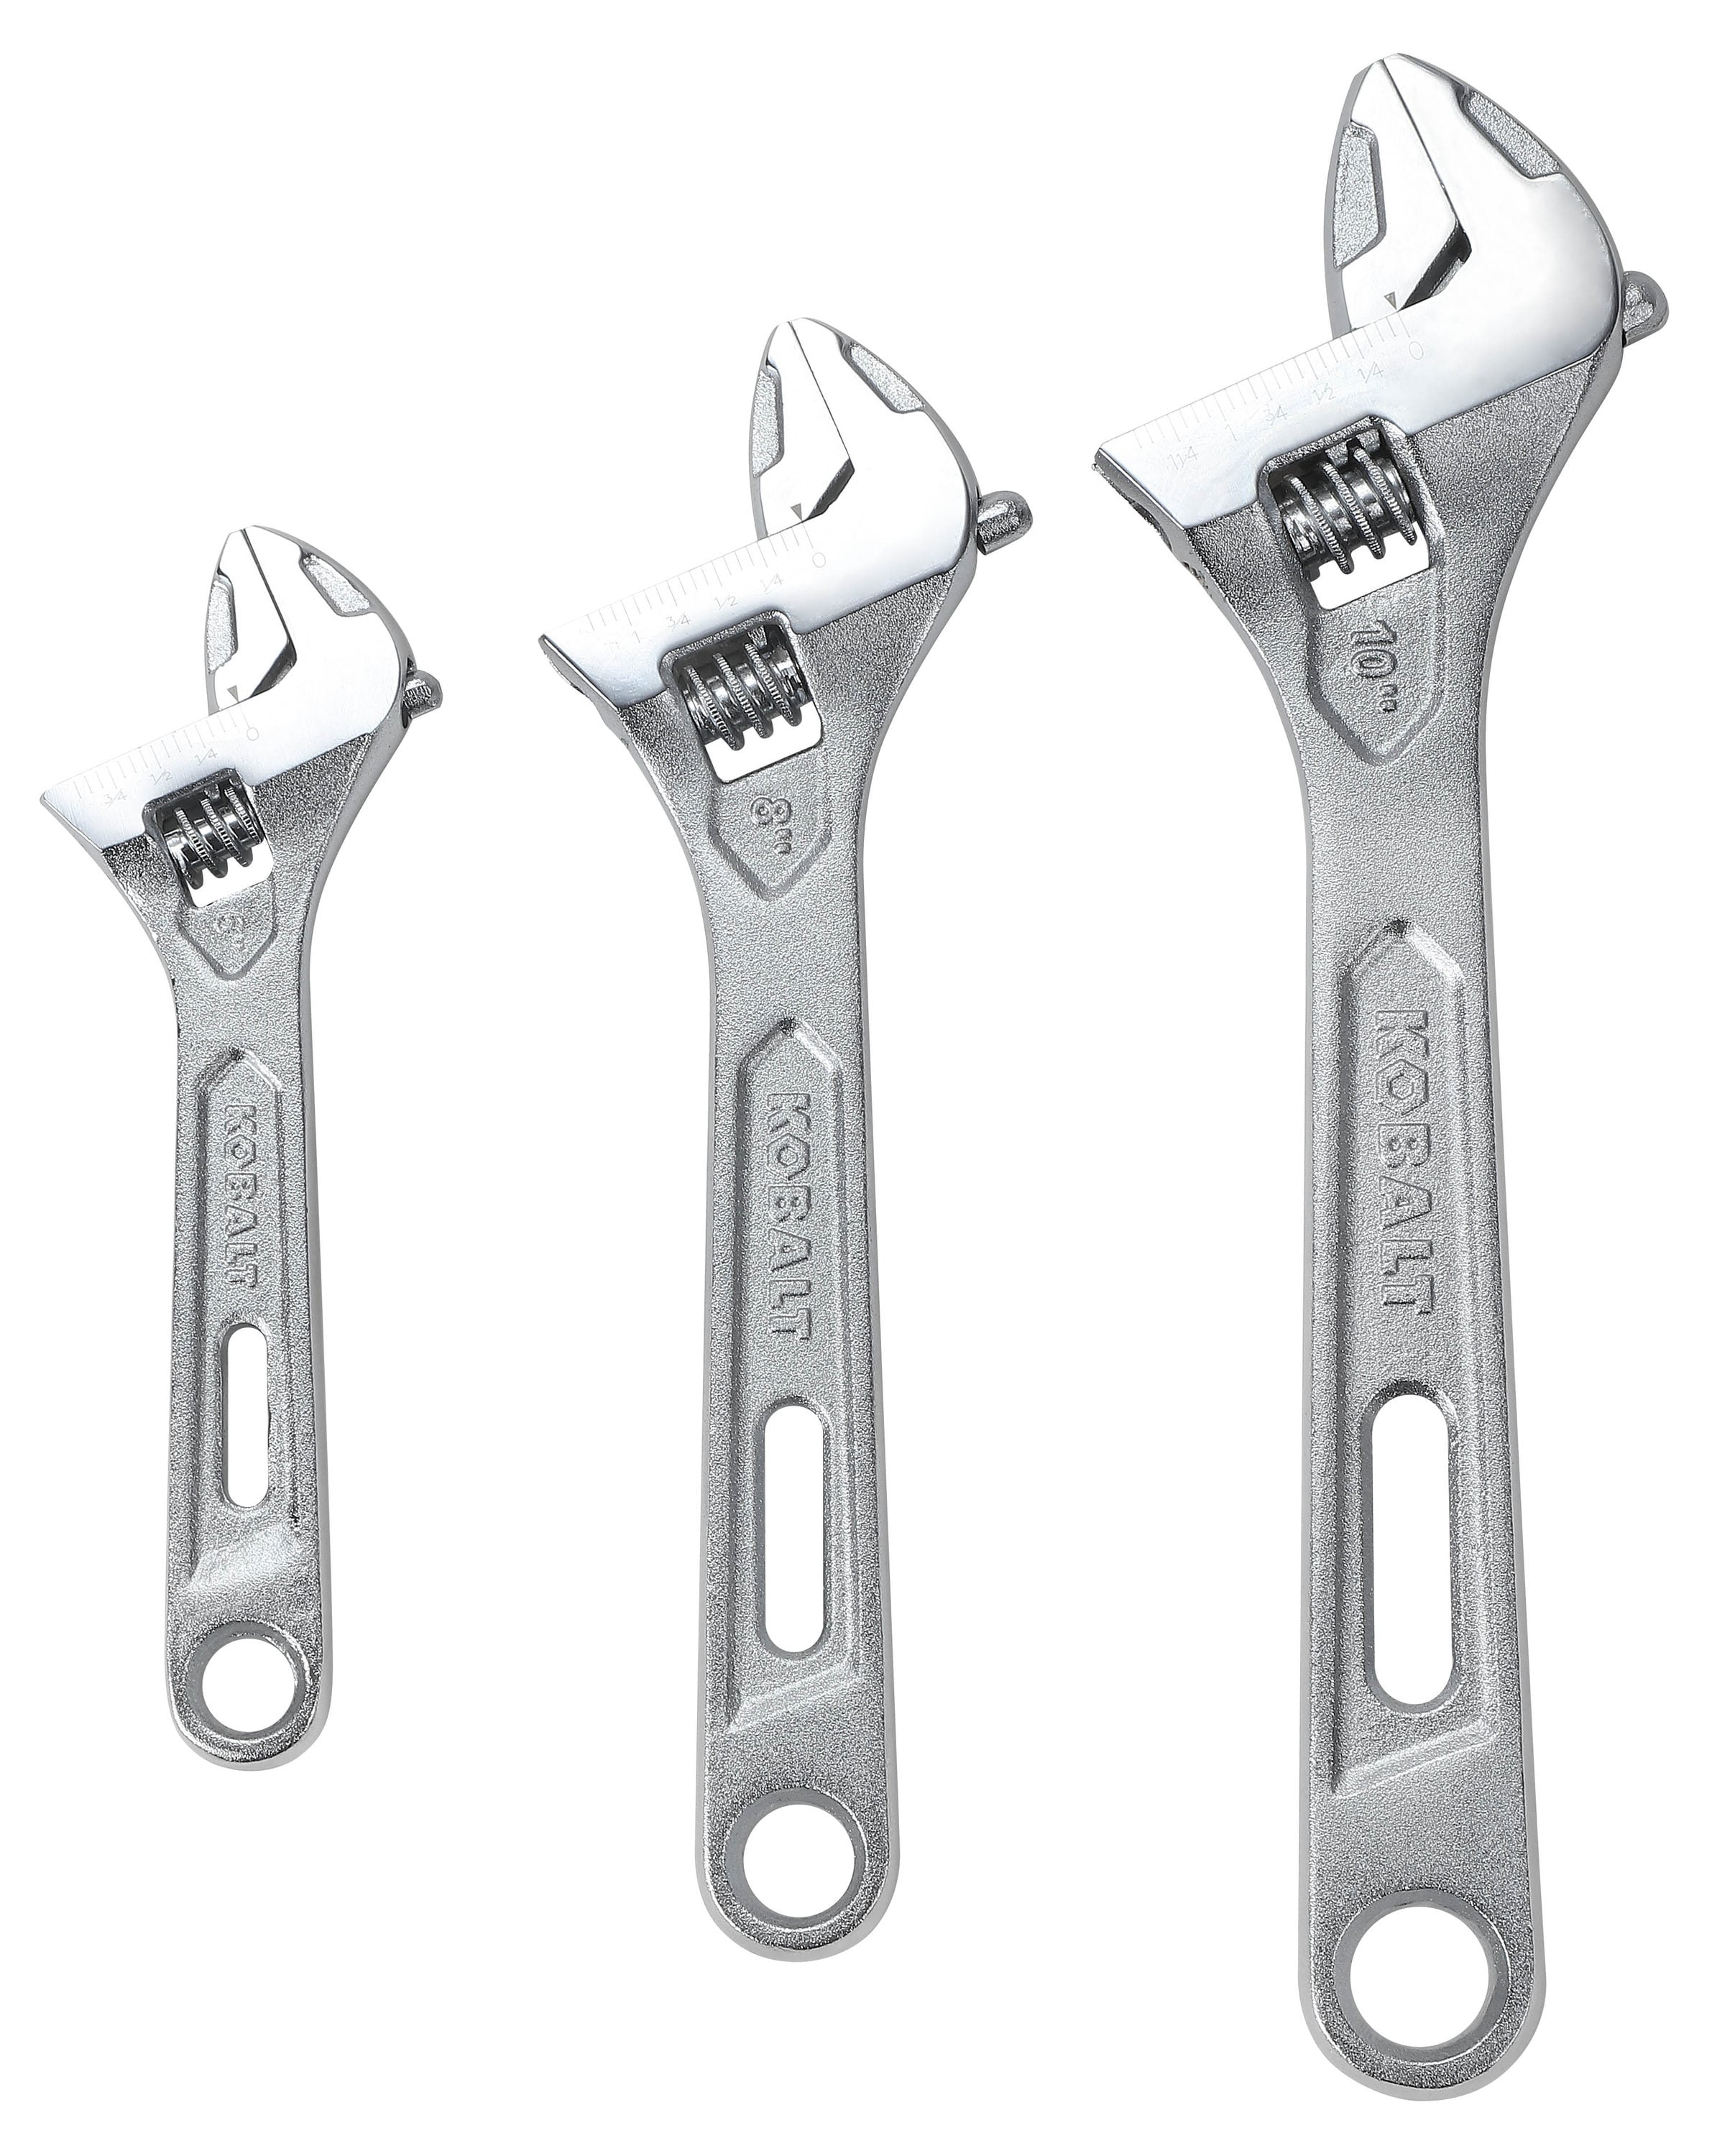 How to use Harbor Freight Strap Wrench - Pittsburgh 2 PC Rubber Strap Wrench  Set 